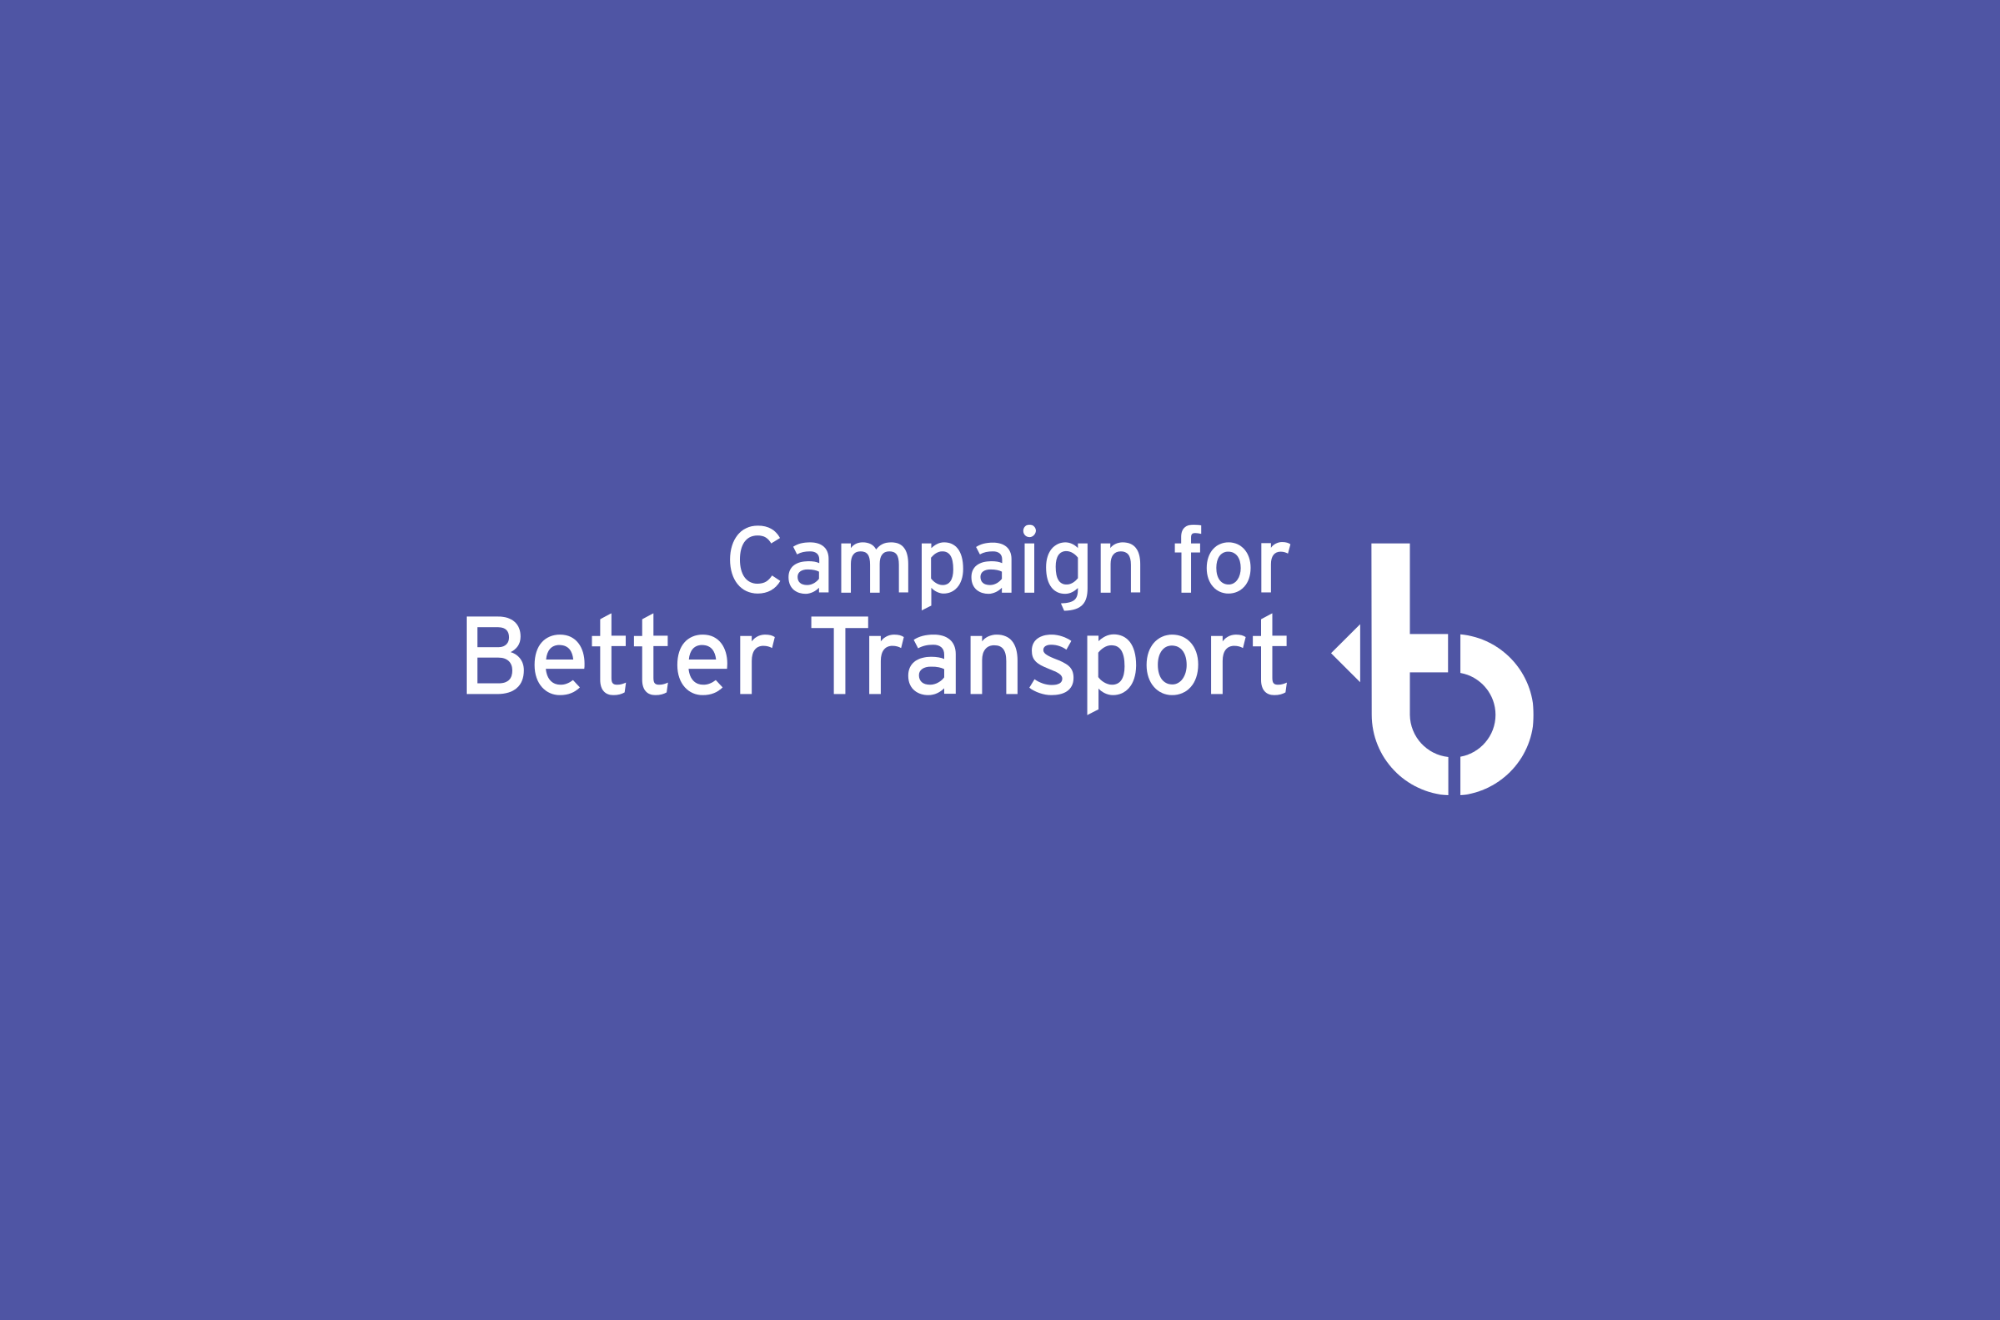 Campaign for Better Transport